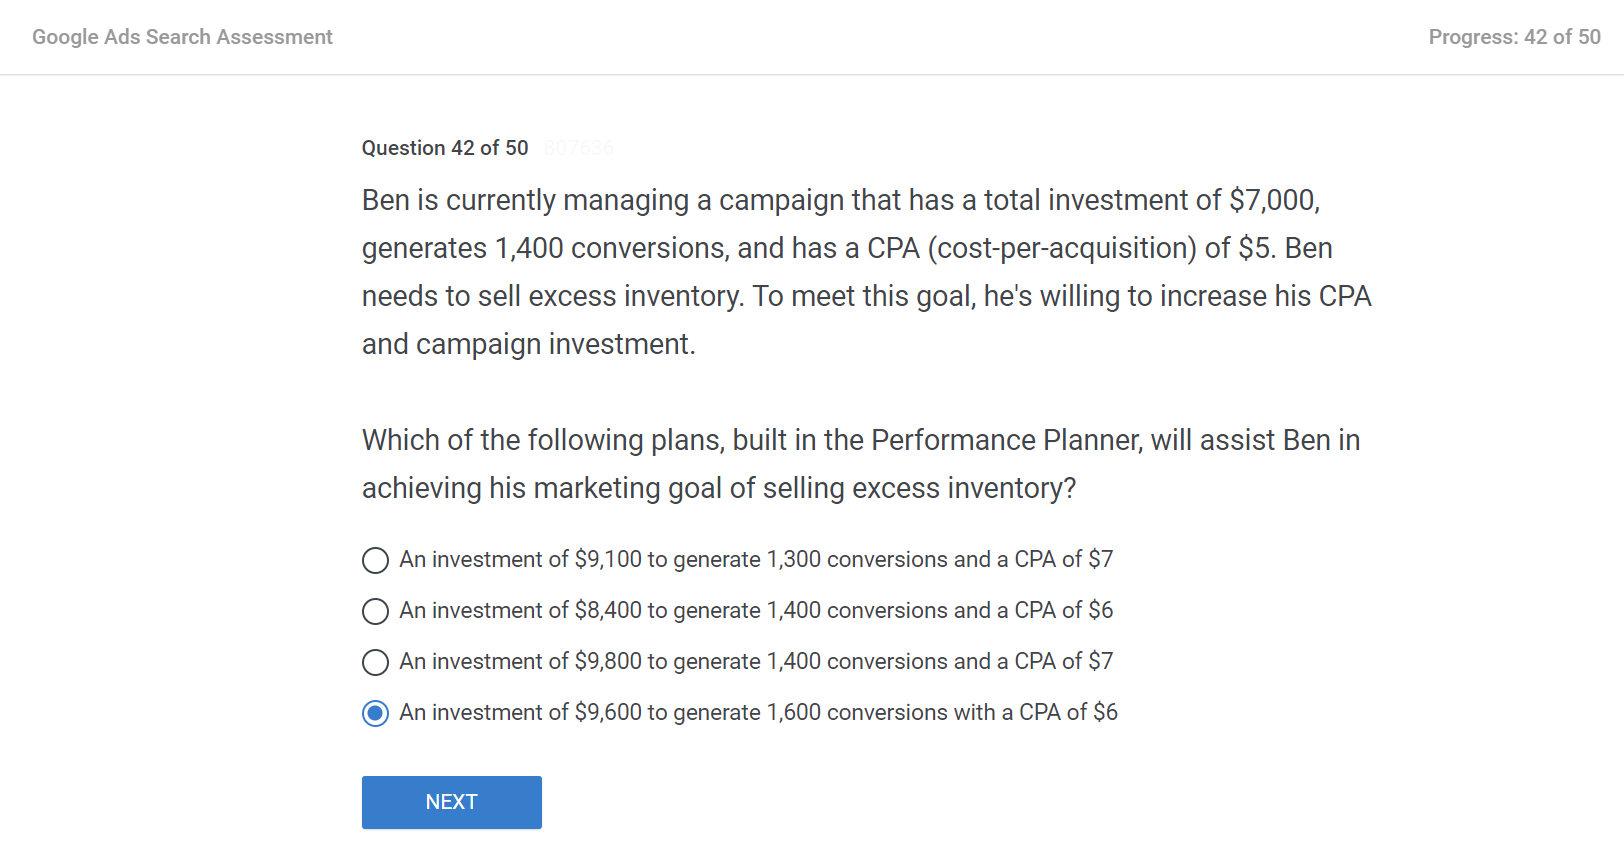 Ben is currently managing a campaign that has a total investment of $7,000, generates 1,400 conversions, and has a CPA (cost-per-acquisition) of $5. Ben needs to sell excess inventory.